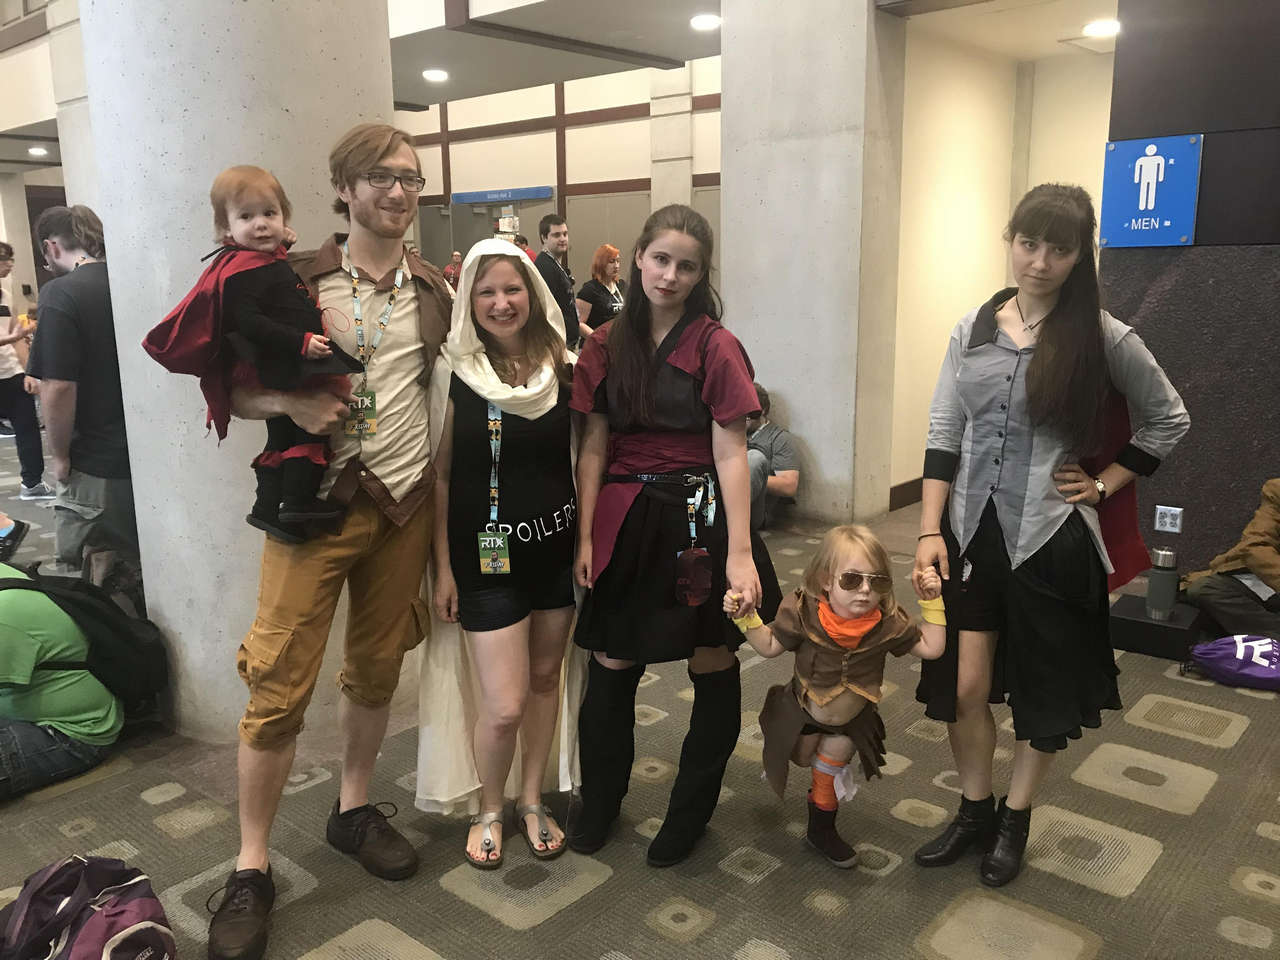 Our Favorite Cosplay Group We That Weve Seen So Far At Rt